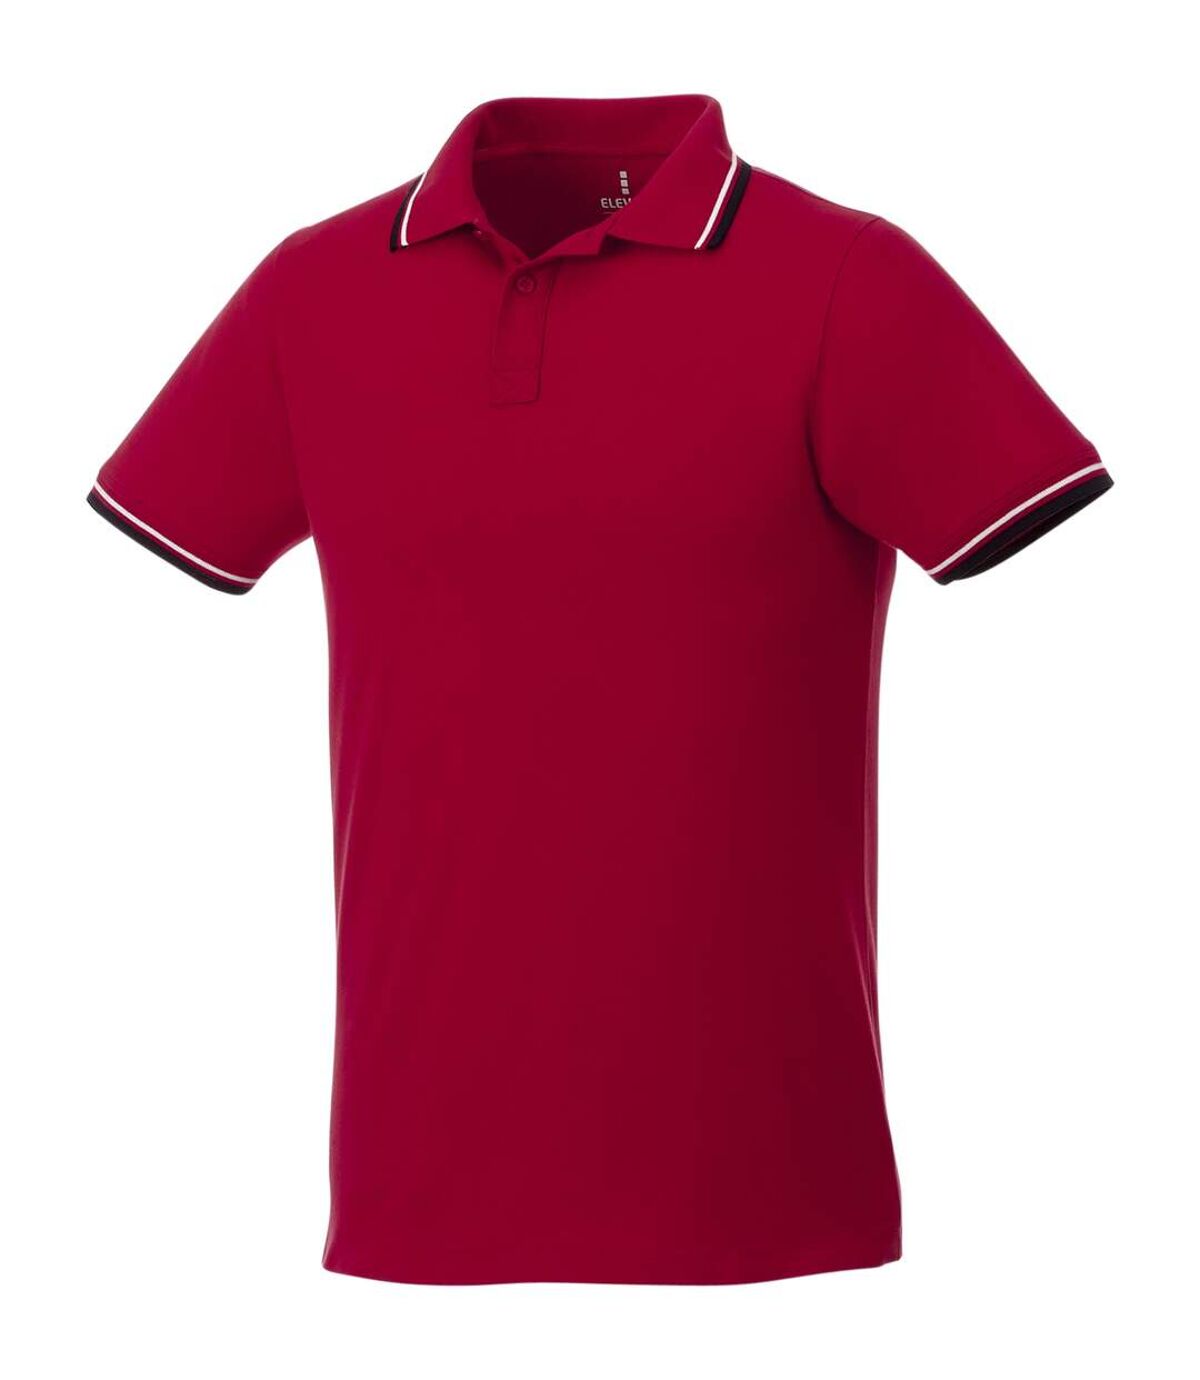 Elevate Mens Fairfield Polo With Tipping (Red/Navy/White) - UTPF2347